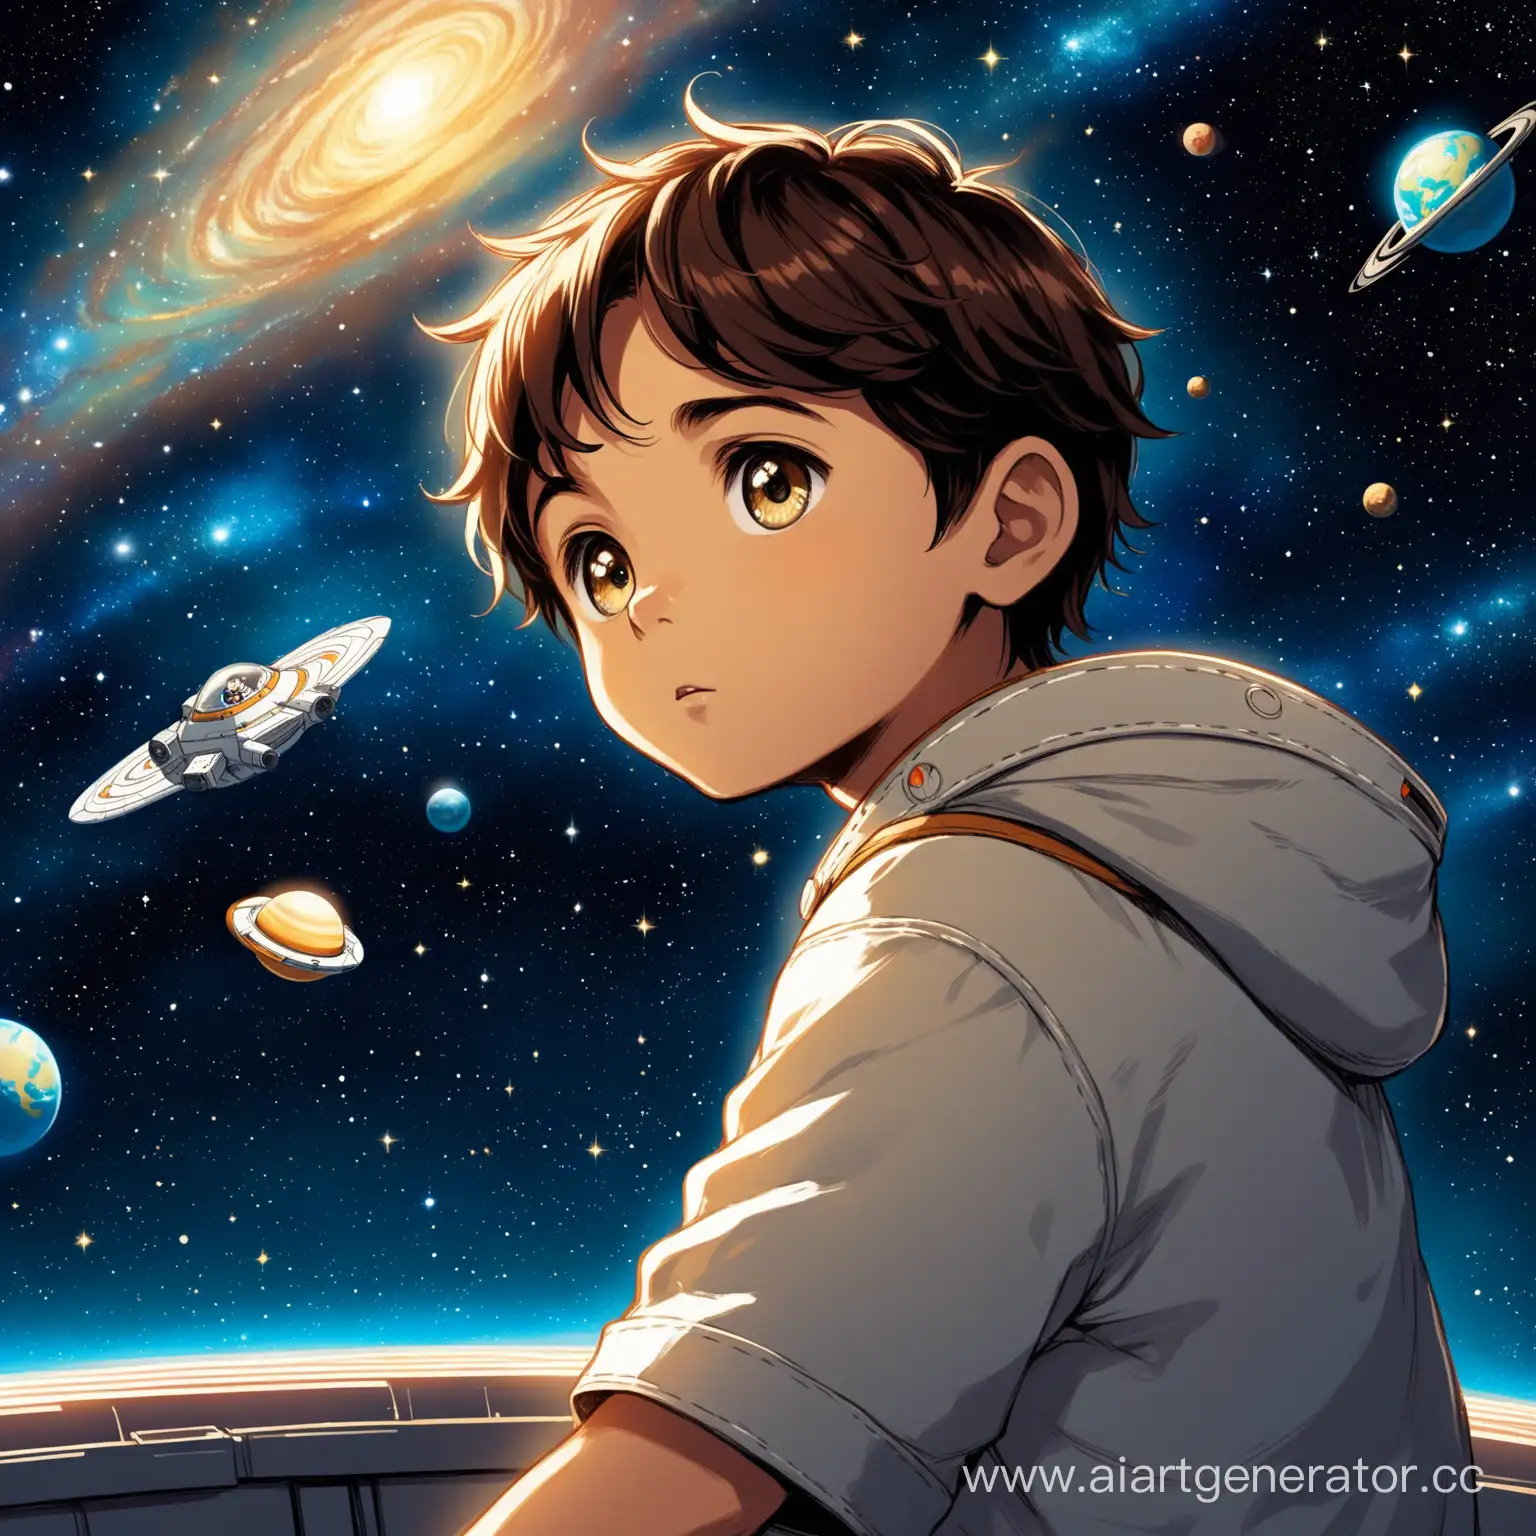 Young-Boys-Space-Adventure-Dreaming-Among-the-Stars